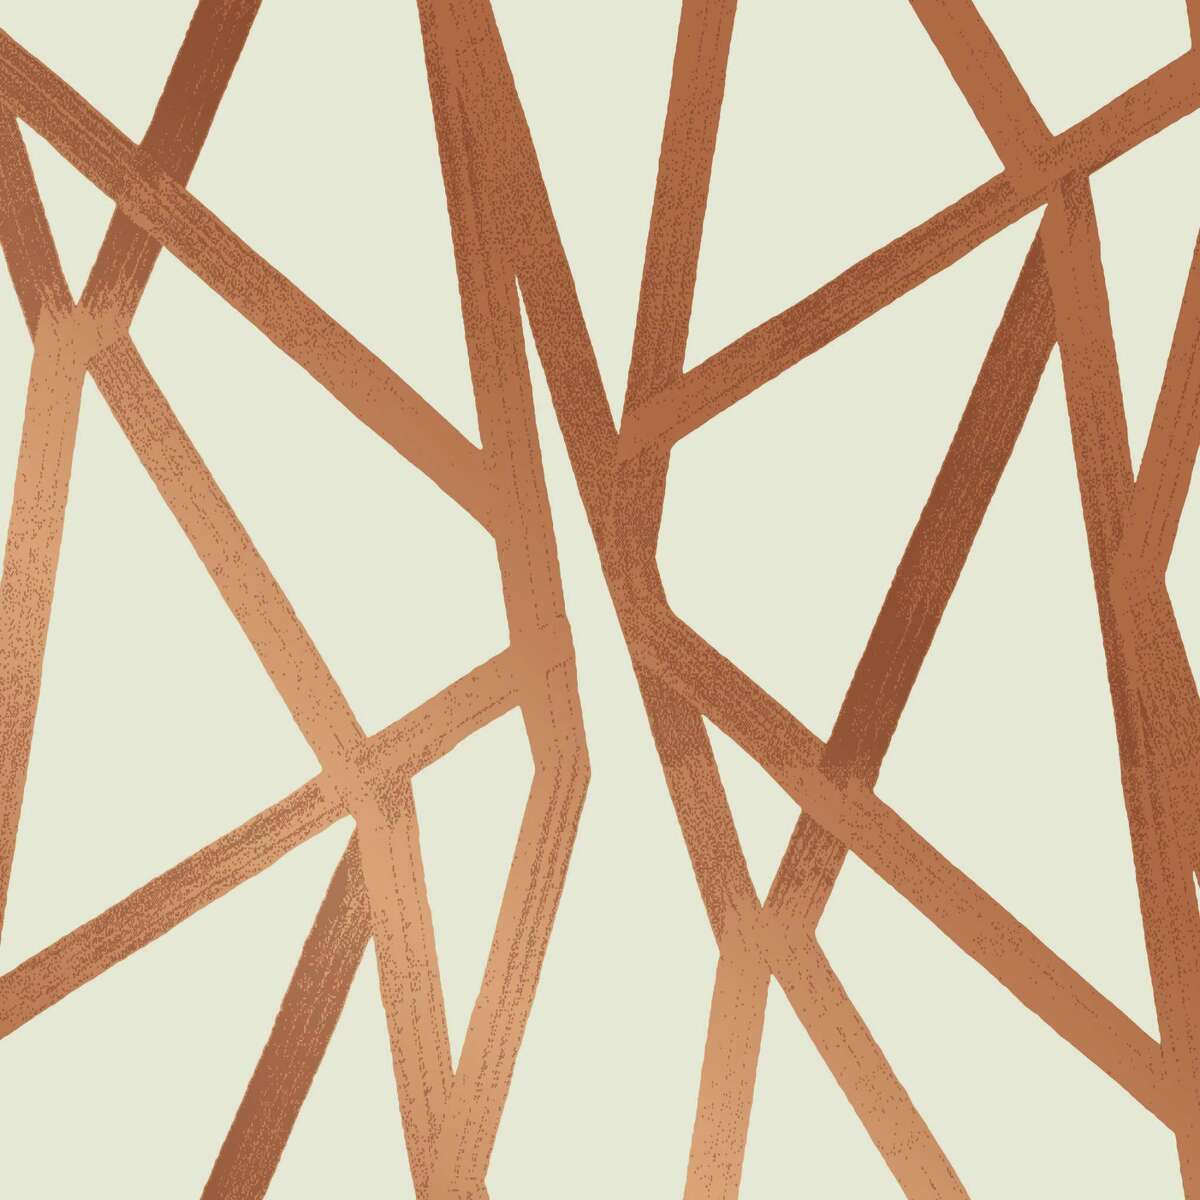 Tempaper’s peel-and-stick wallpaper in the “Intersections” pattern in Urban Bronze, $125 per double roll.